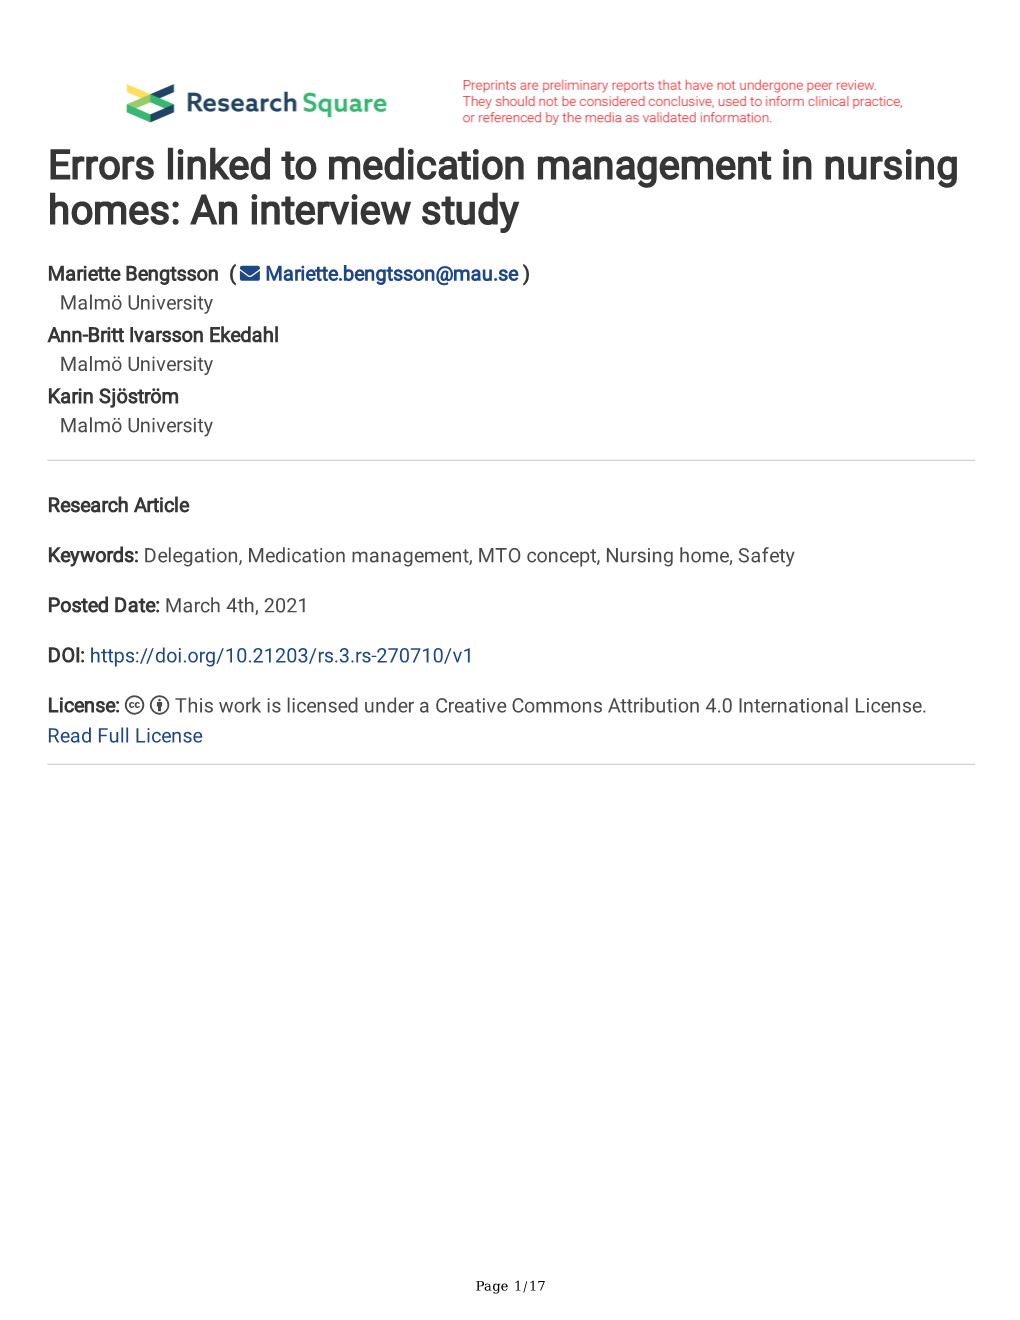 Errors Linked to Medication Management in Nursing Homes: an Interview Study